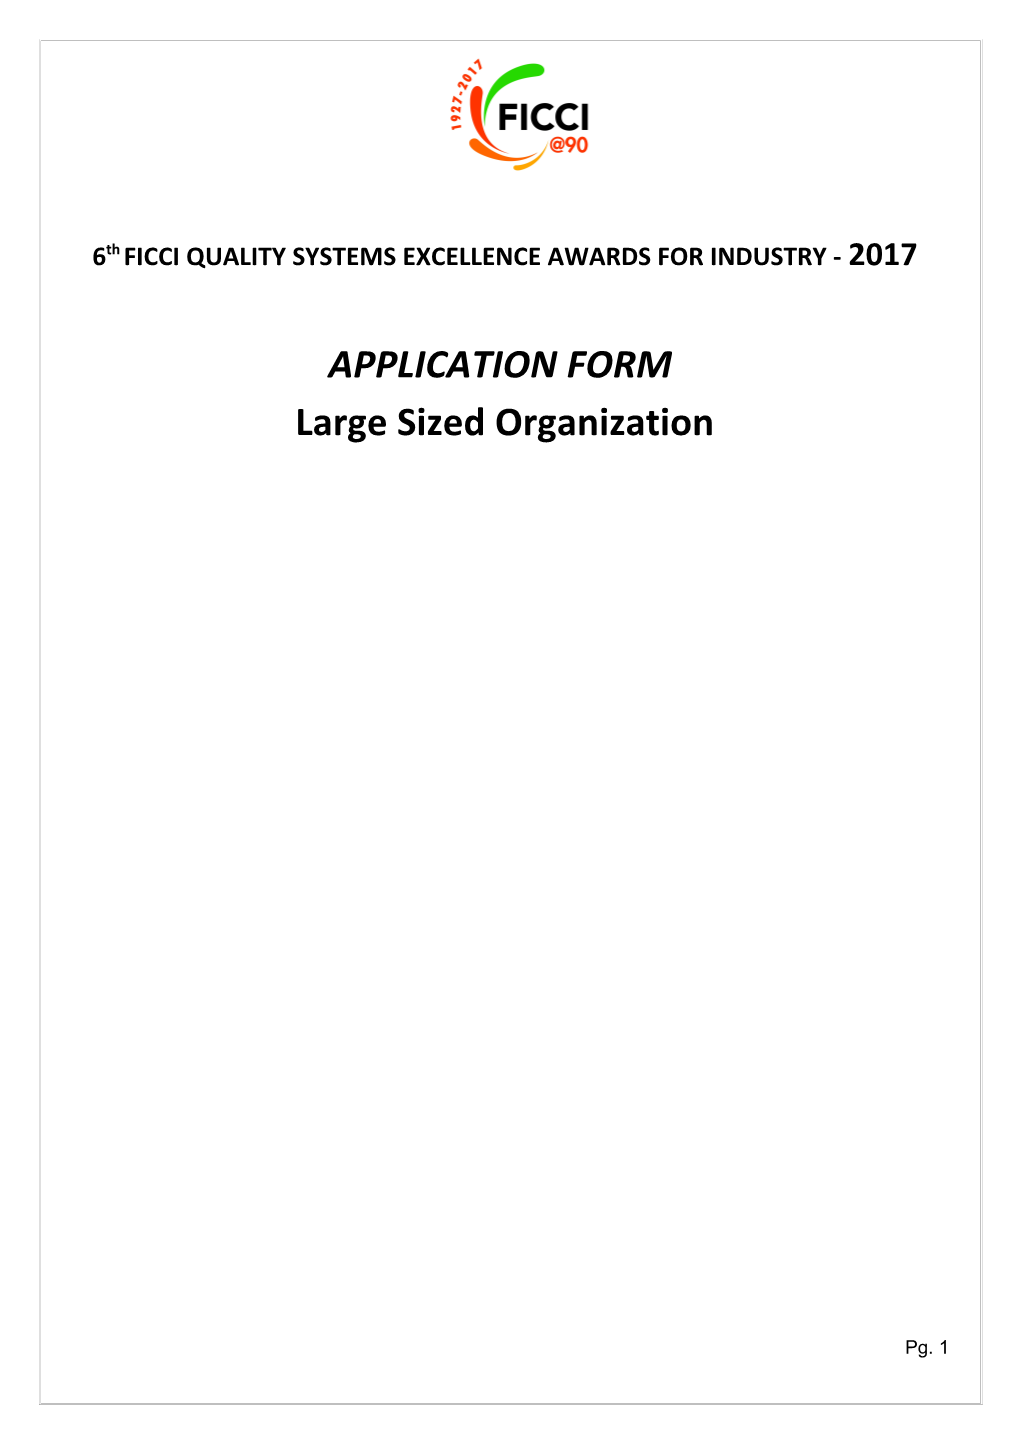 6Thficci QUALITY SYSTEMS EXCELLENCE AWARDS FORINDUSTRY- 2017